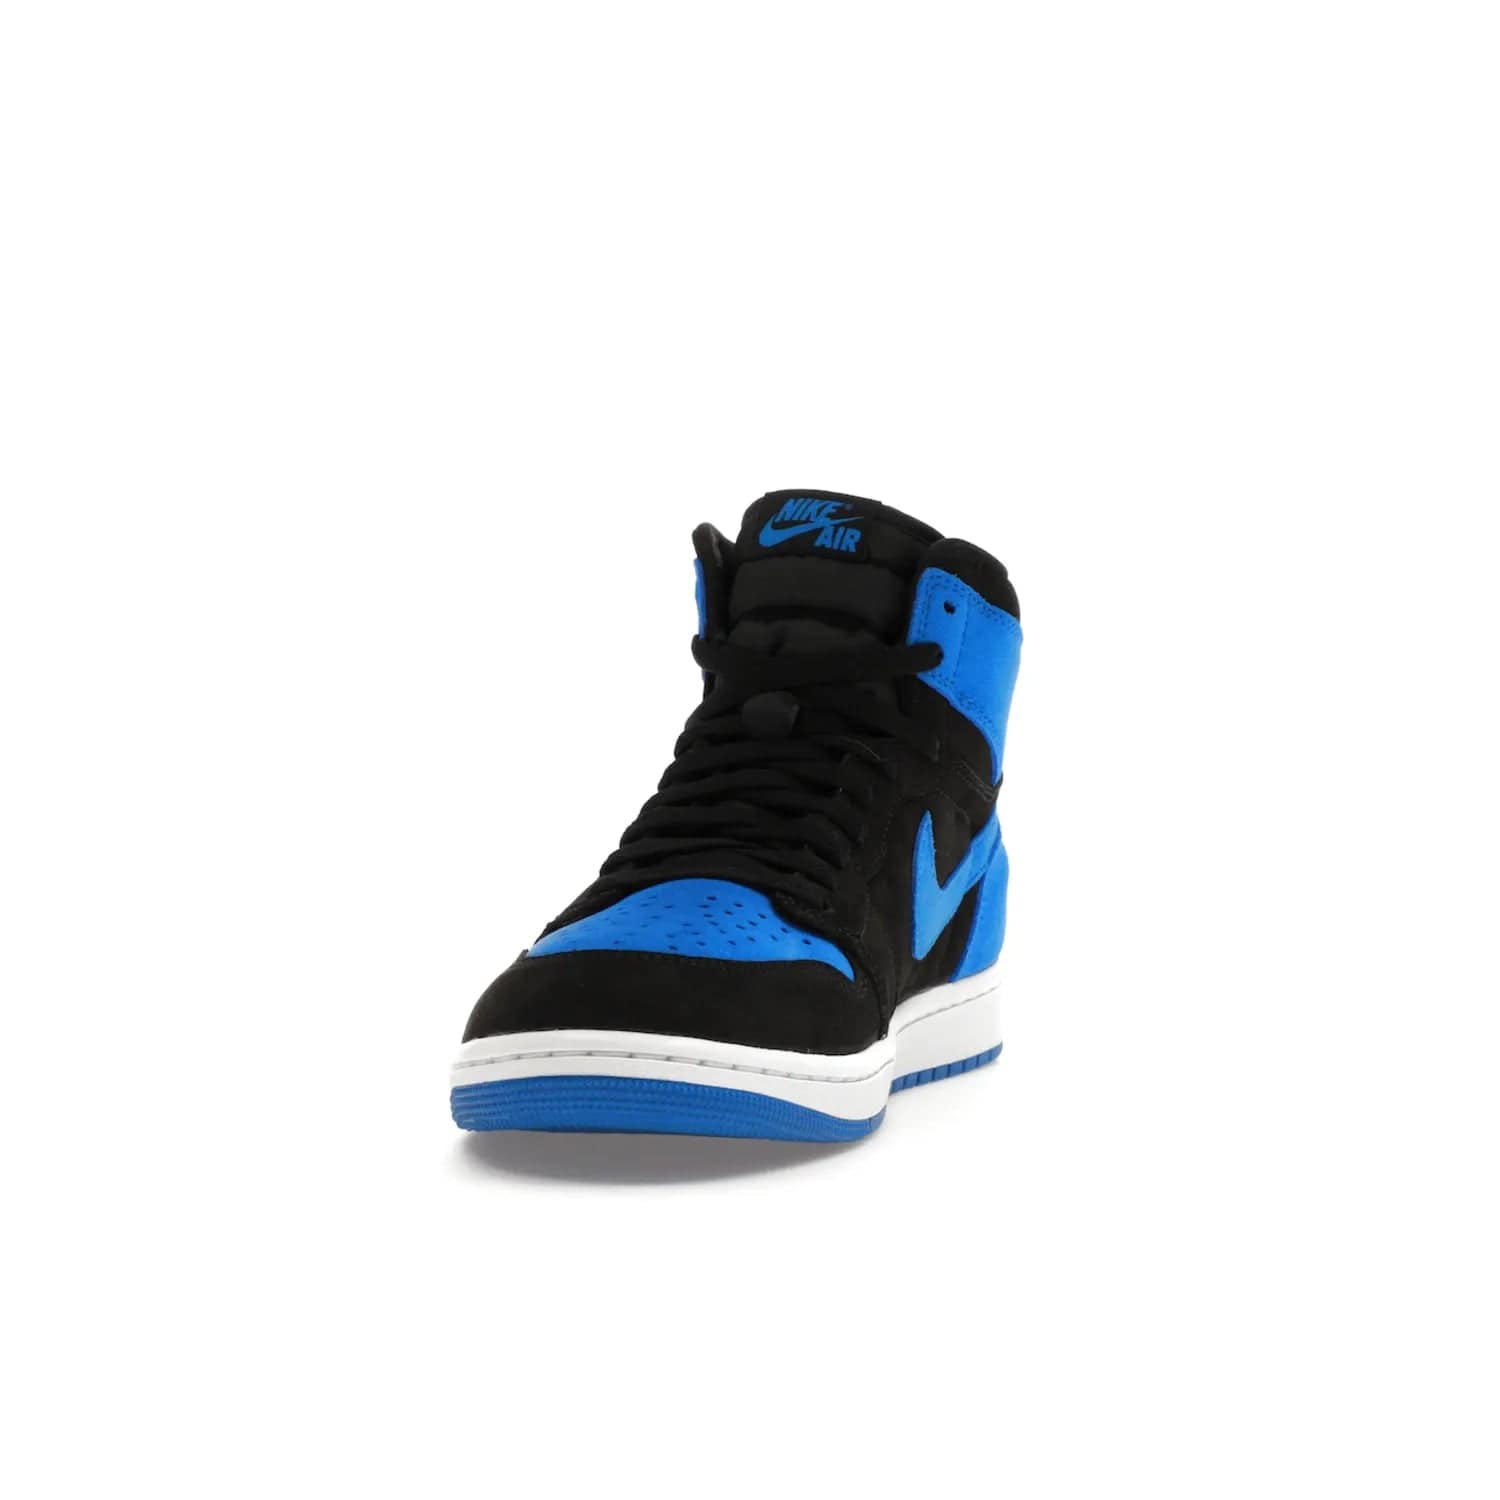 Jordan 1 Retro High OG Royal Reimagined - Image 12 - Only at www.BallersClubKickz.com - ####
Old meets the new: Jordan 1 Retro High OG 'Royal Reimagined' is a bold statement of evolution with its royal blue and black suede material makeup. Swoosh overlays, Wings logos, padded ankle collars and Nike Air tags maintain the OG's legendary lineage. Get a pair on November 4th and be part of a fearless, unyielding story.